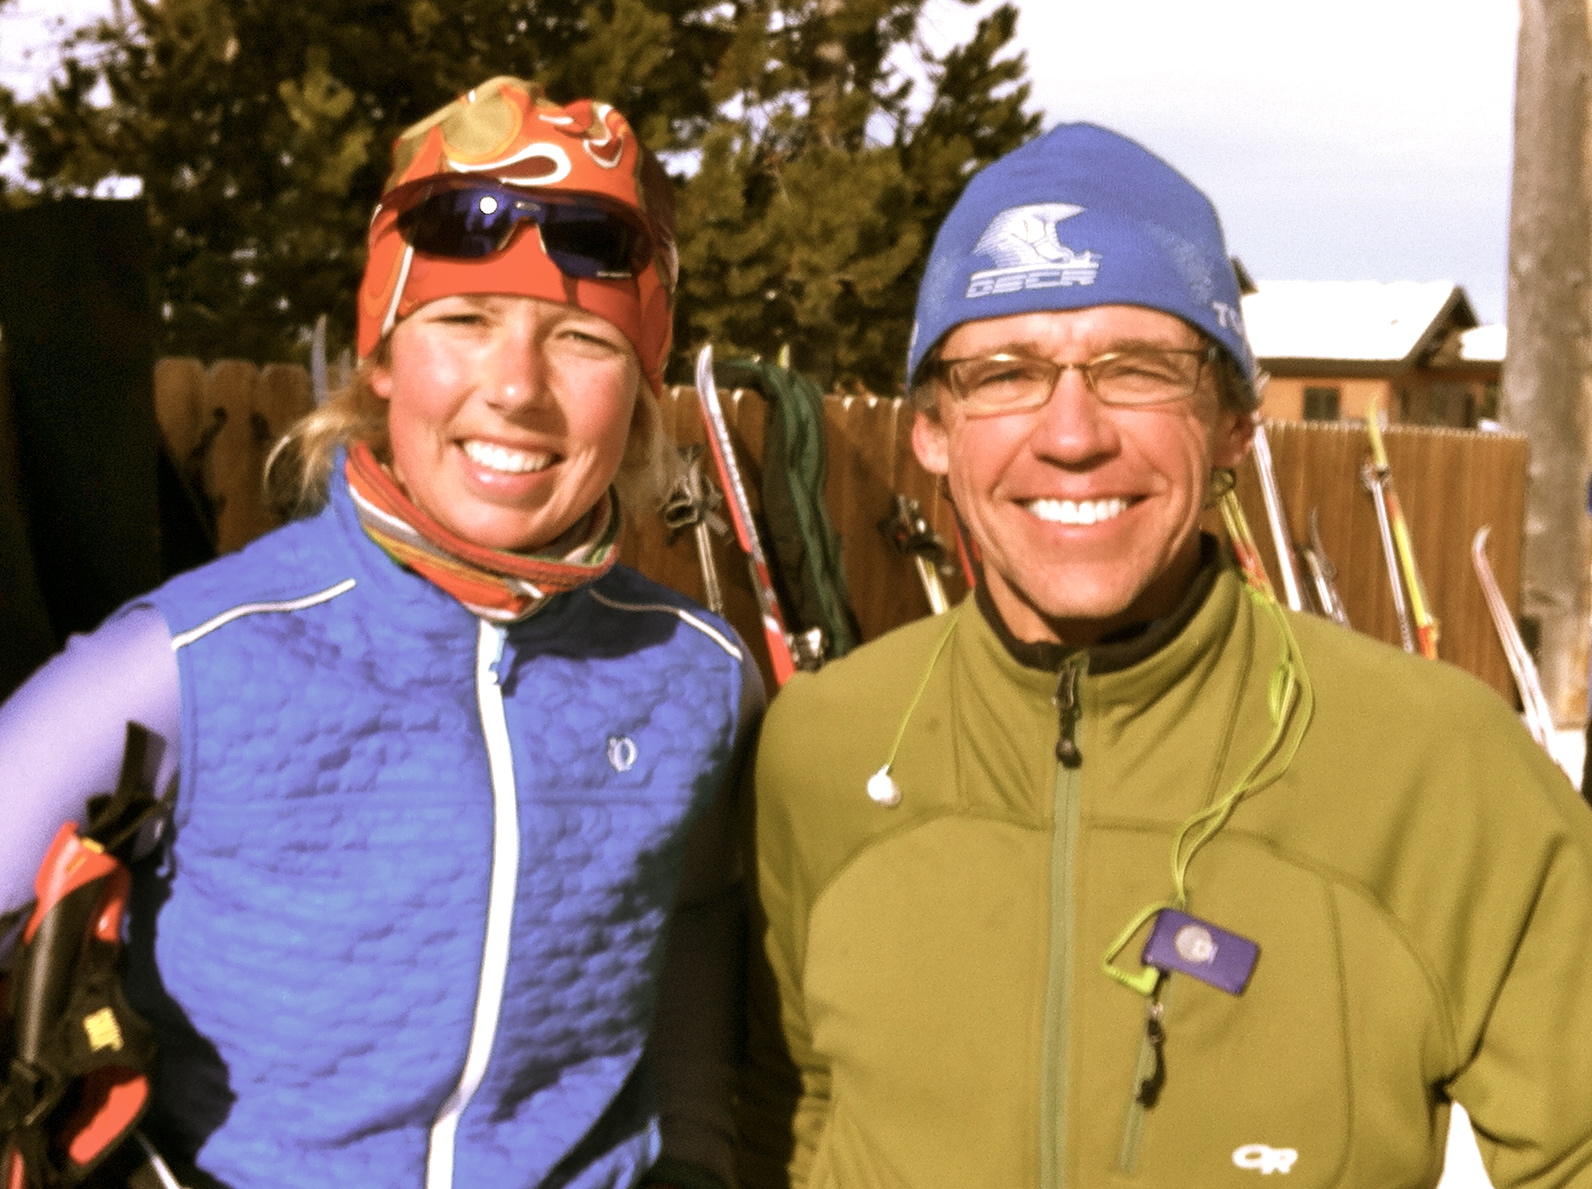 From left to right: Alex Matthews, Managing Editor, and Mark Vosburgh, Para Nordic Contributor, in West Yellowstone, Mont.  "Let the races begin!"